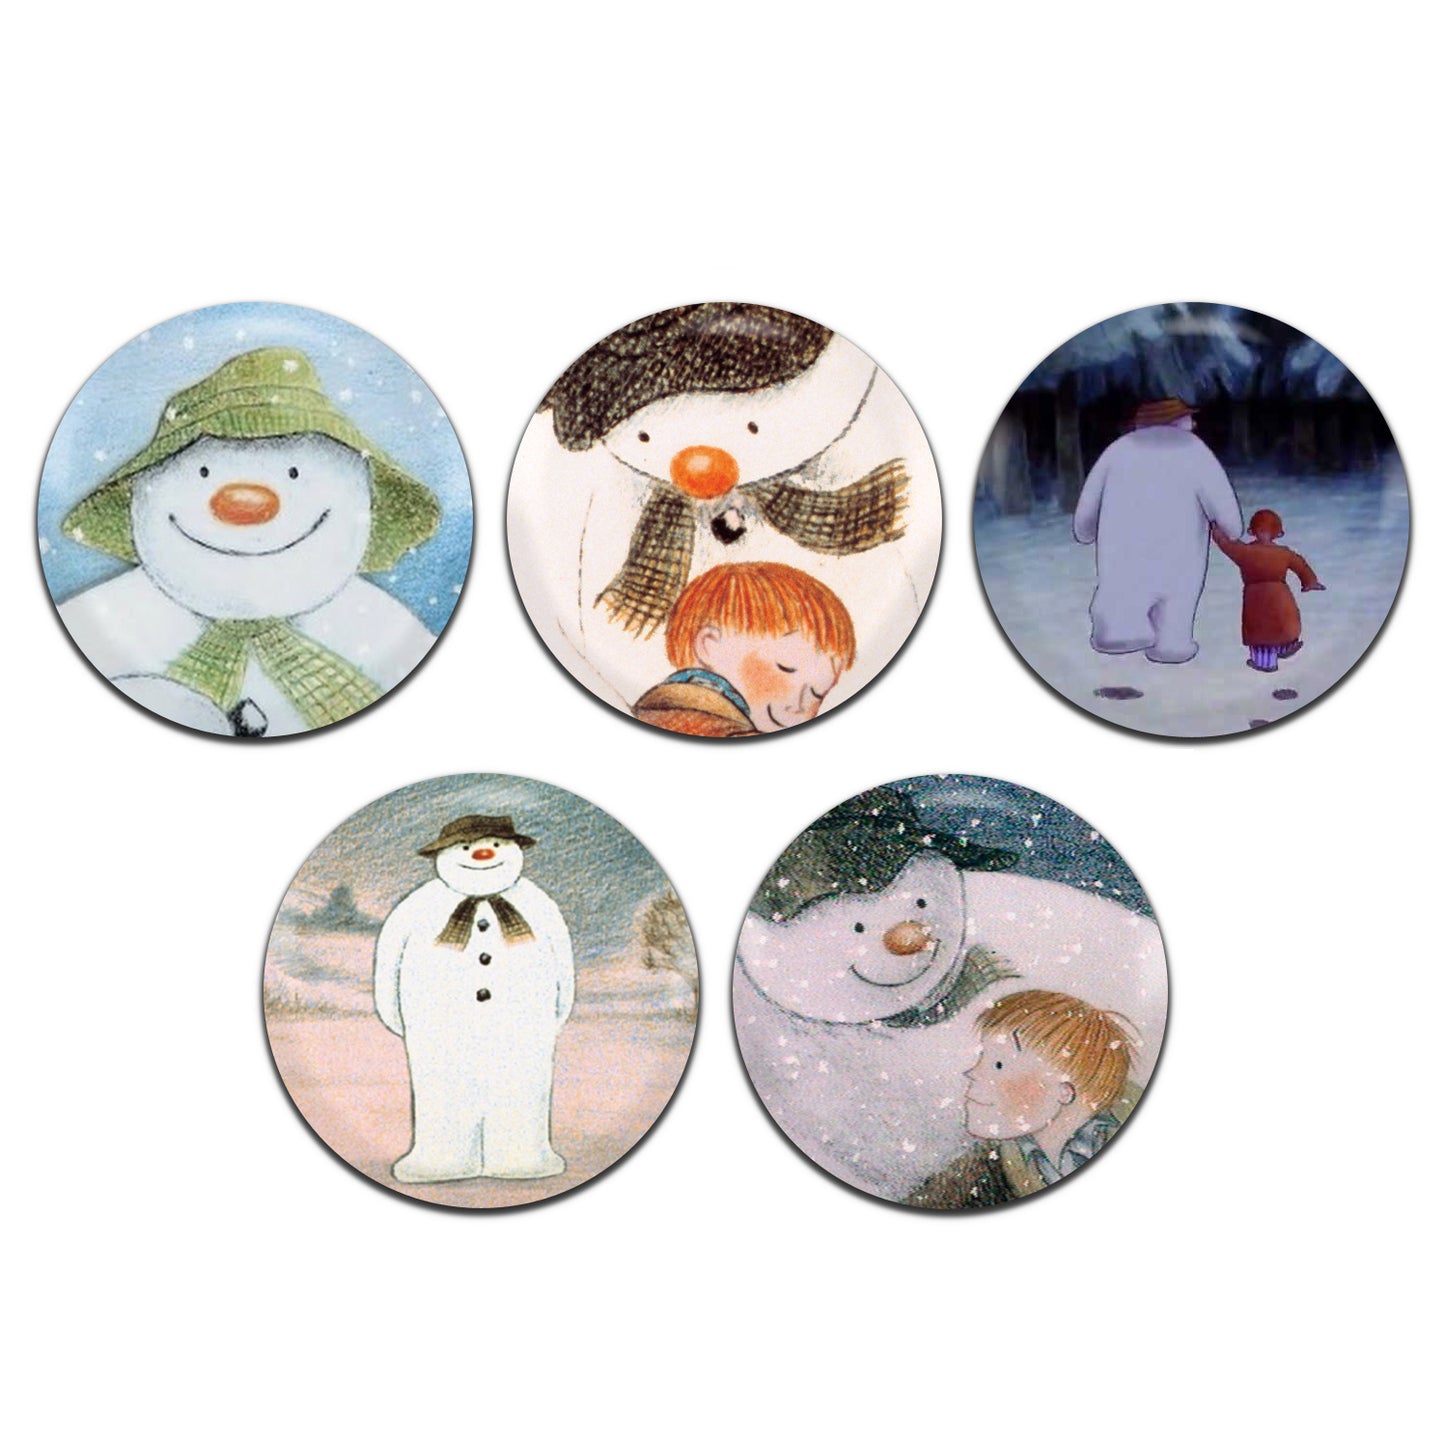 The Snowman Christmas Animation 80's 25mm / 1 Inch D-Pin Button Badges (5x Set)